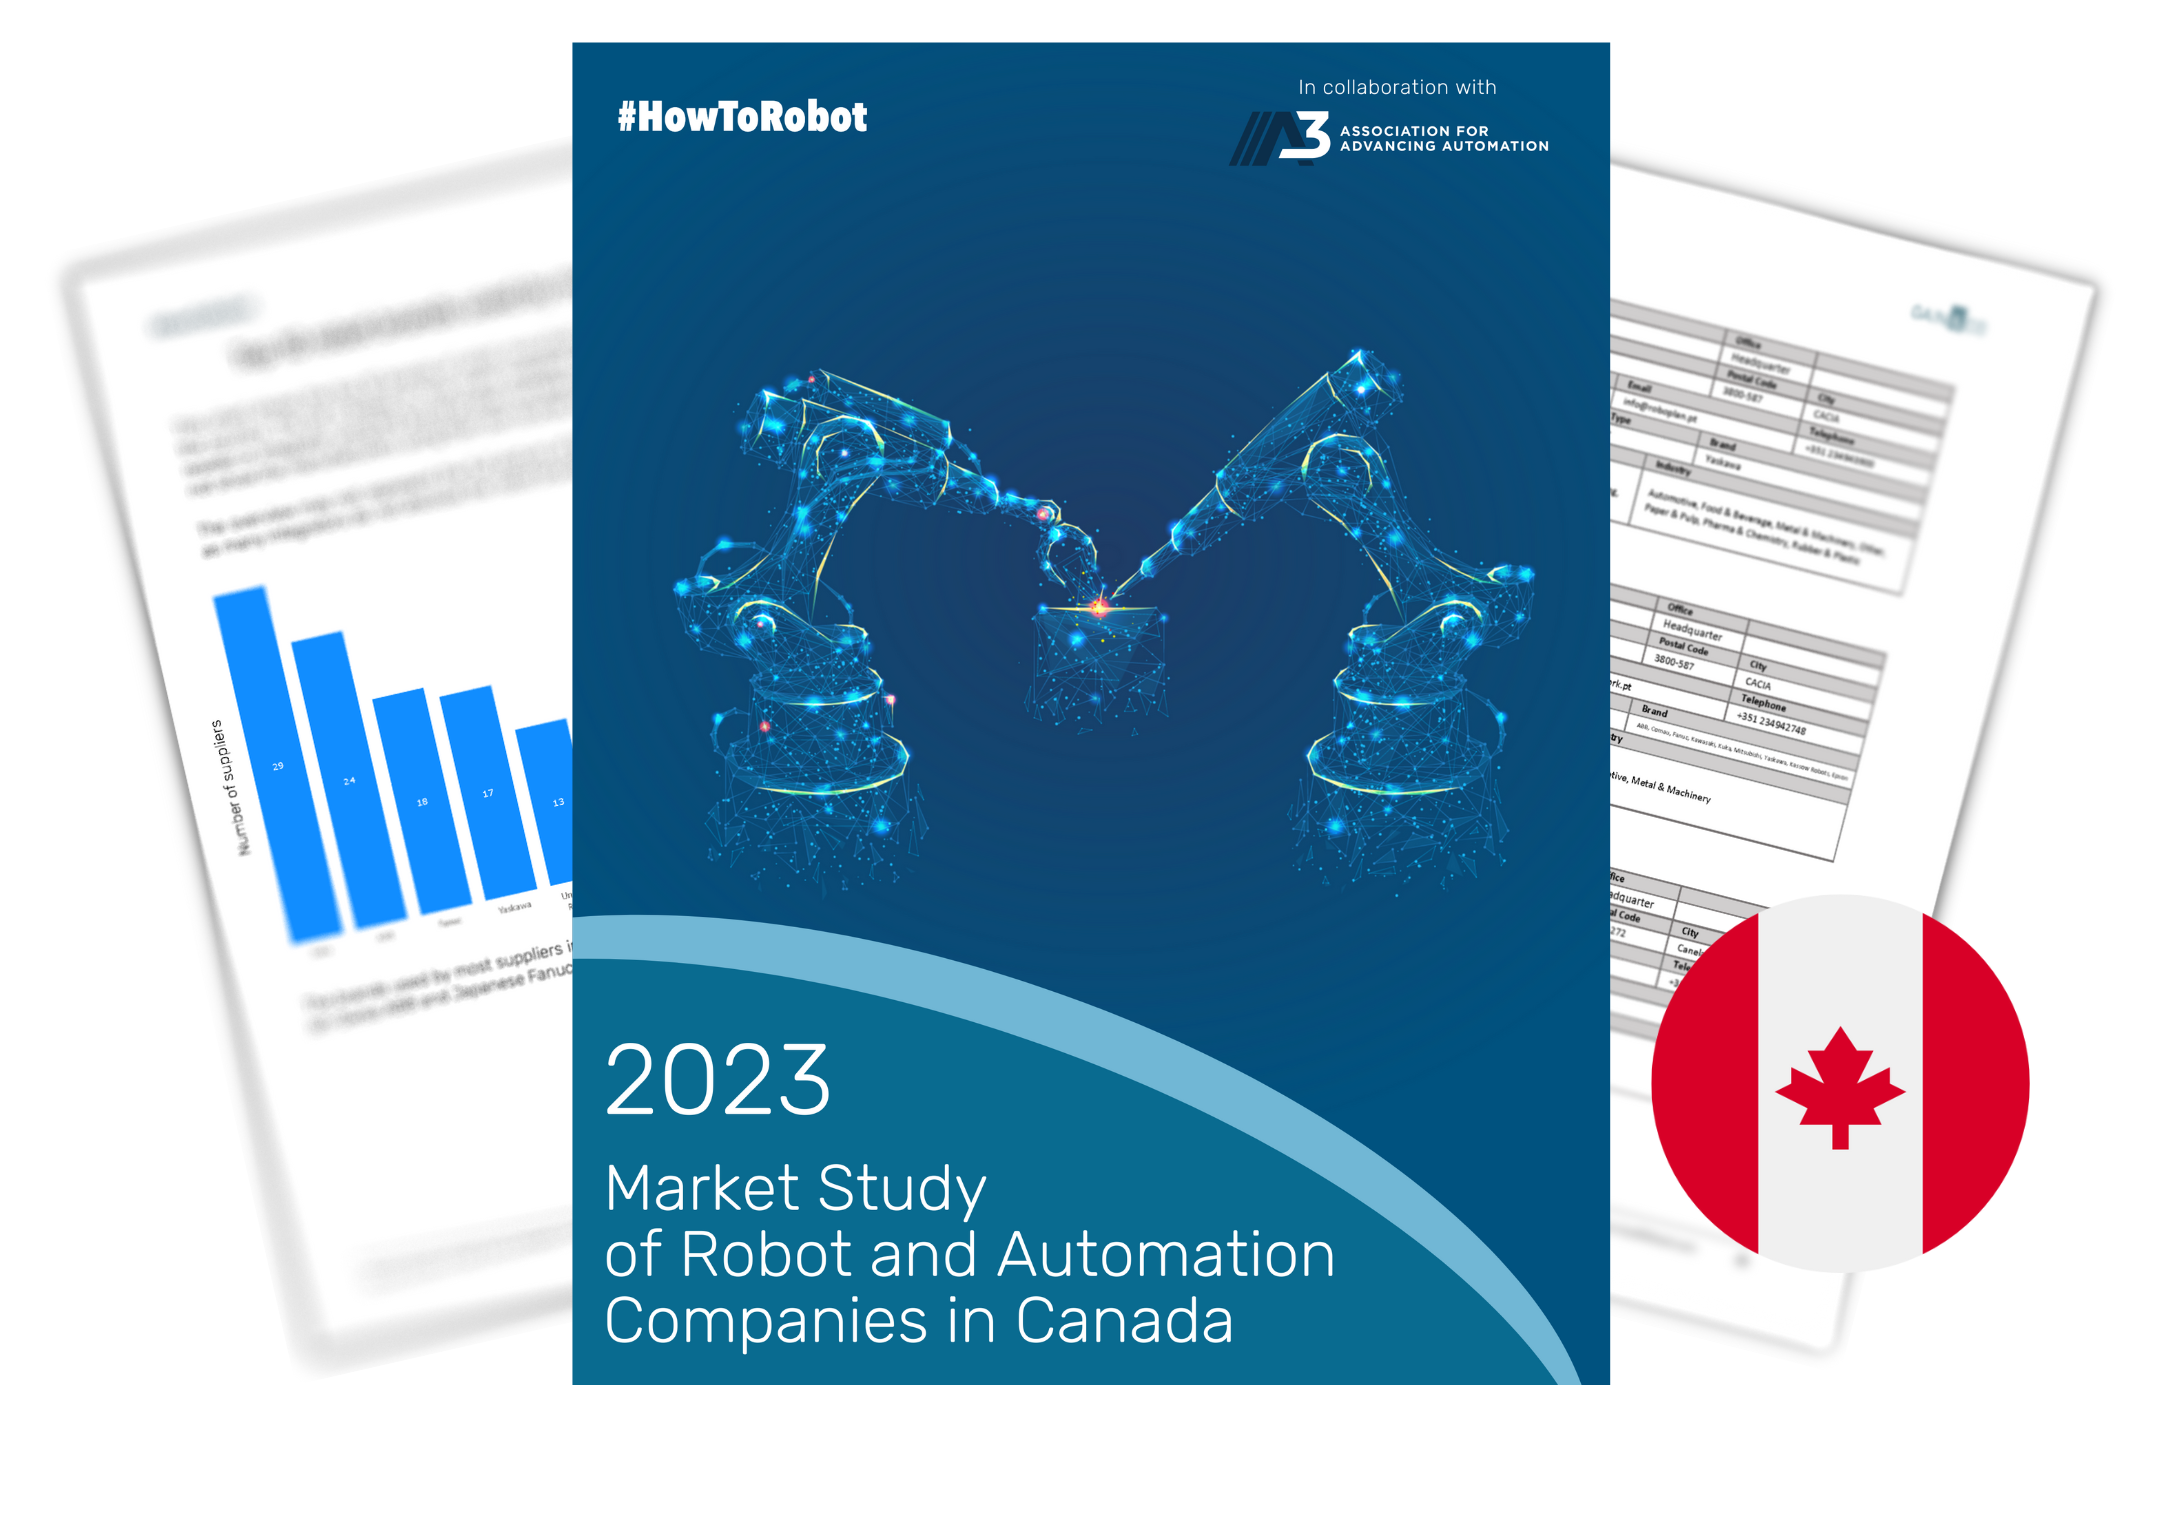 Market Study of Robot and Automation Companies in Canada